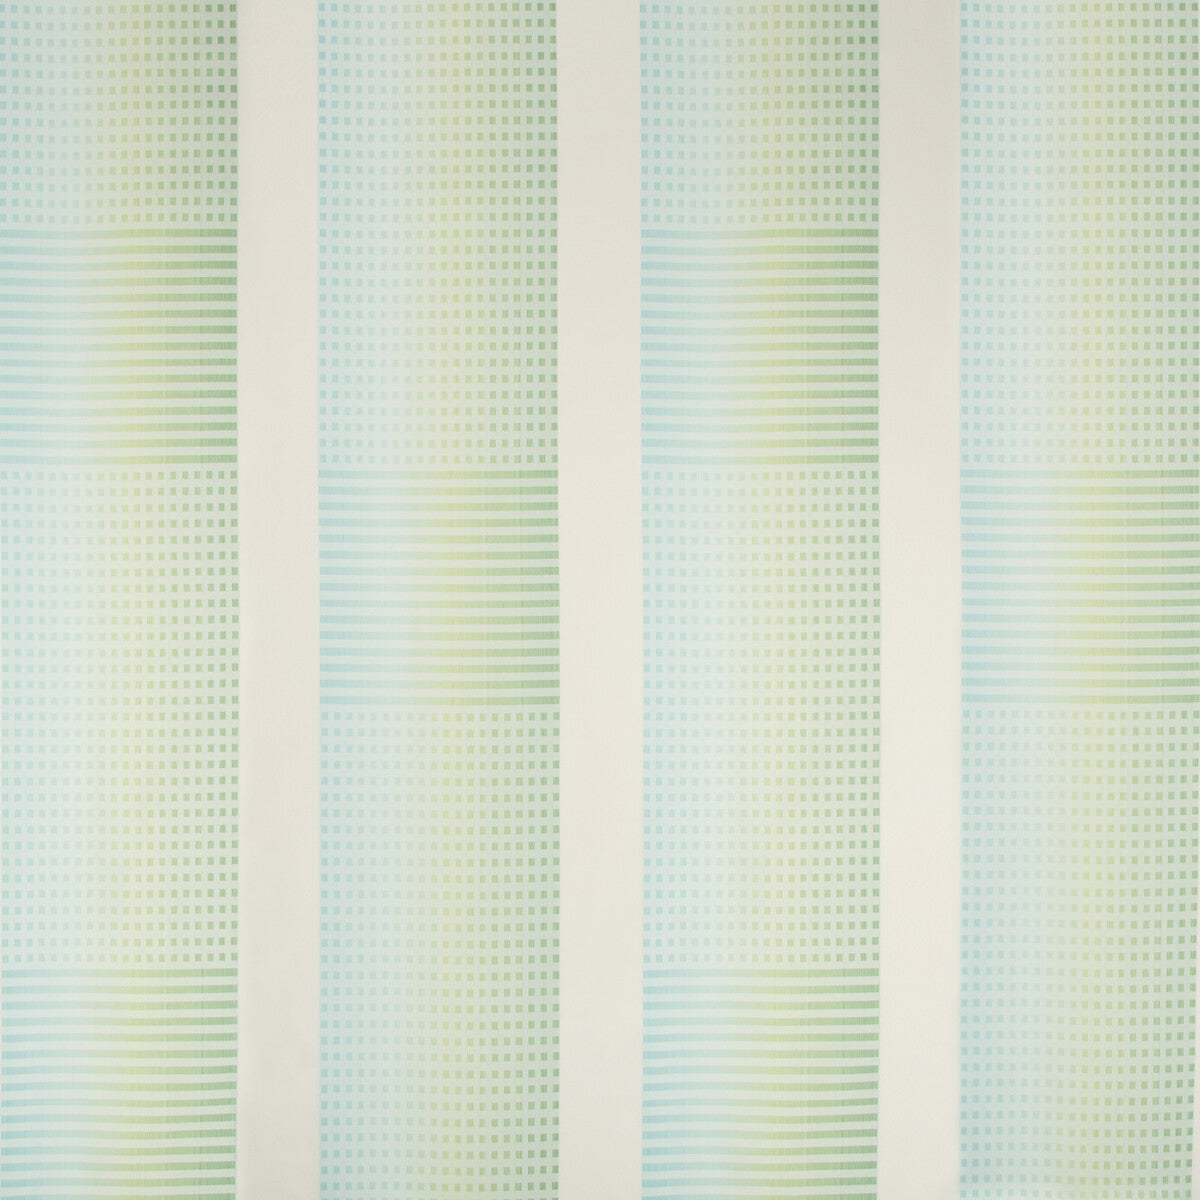 Highrise fabric in sea glass color - pattern 4626.315.0 - by Kravet Contract in the Privacy Curtains collection